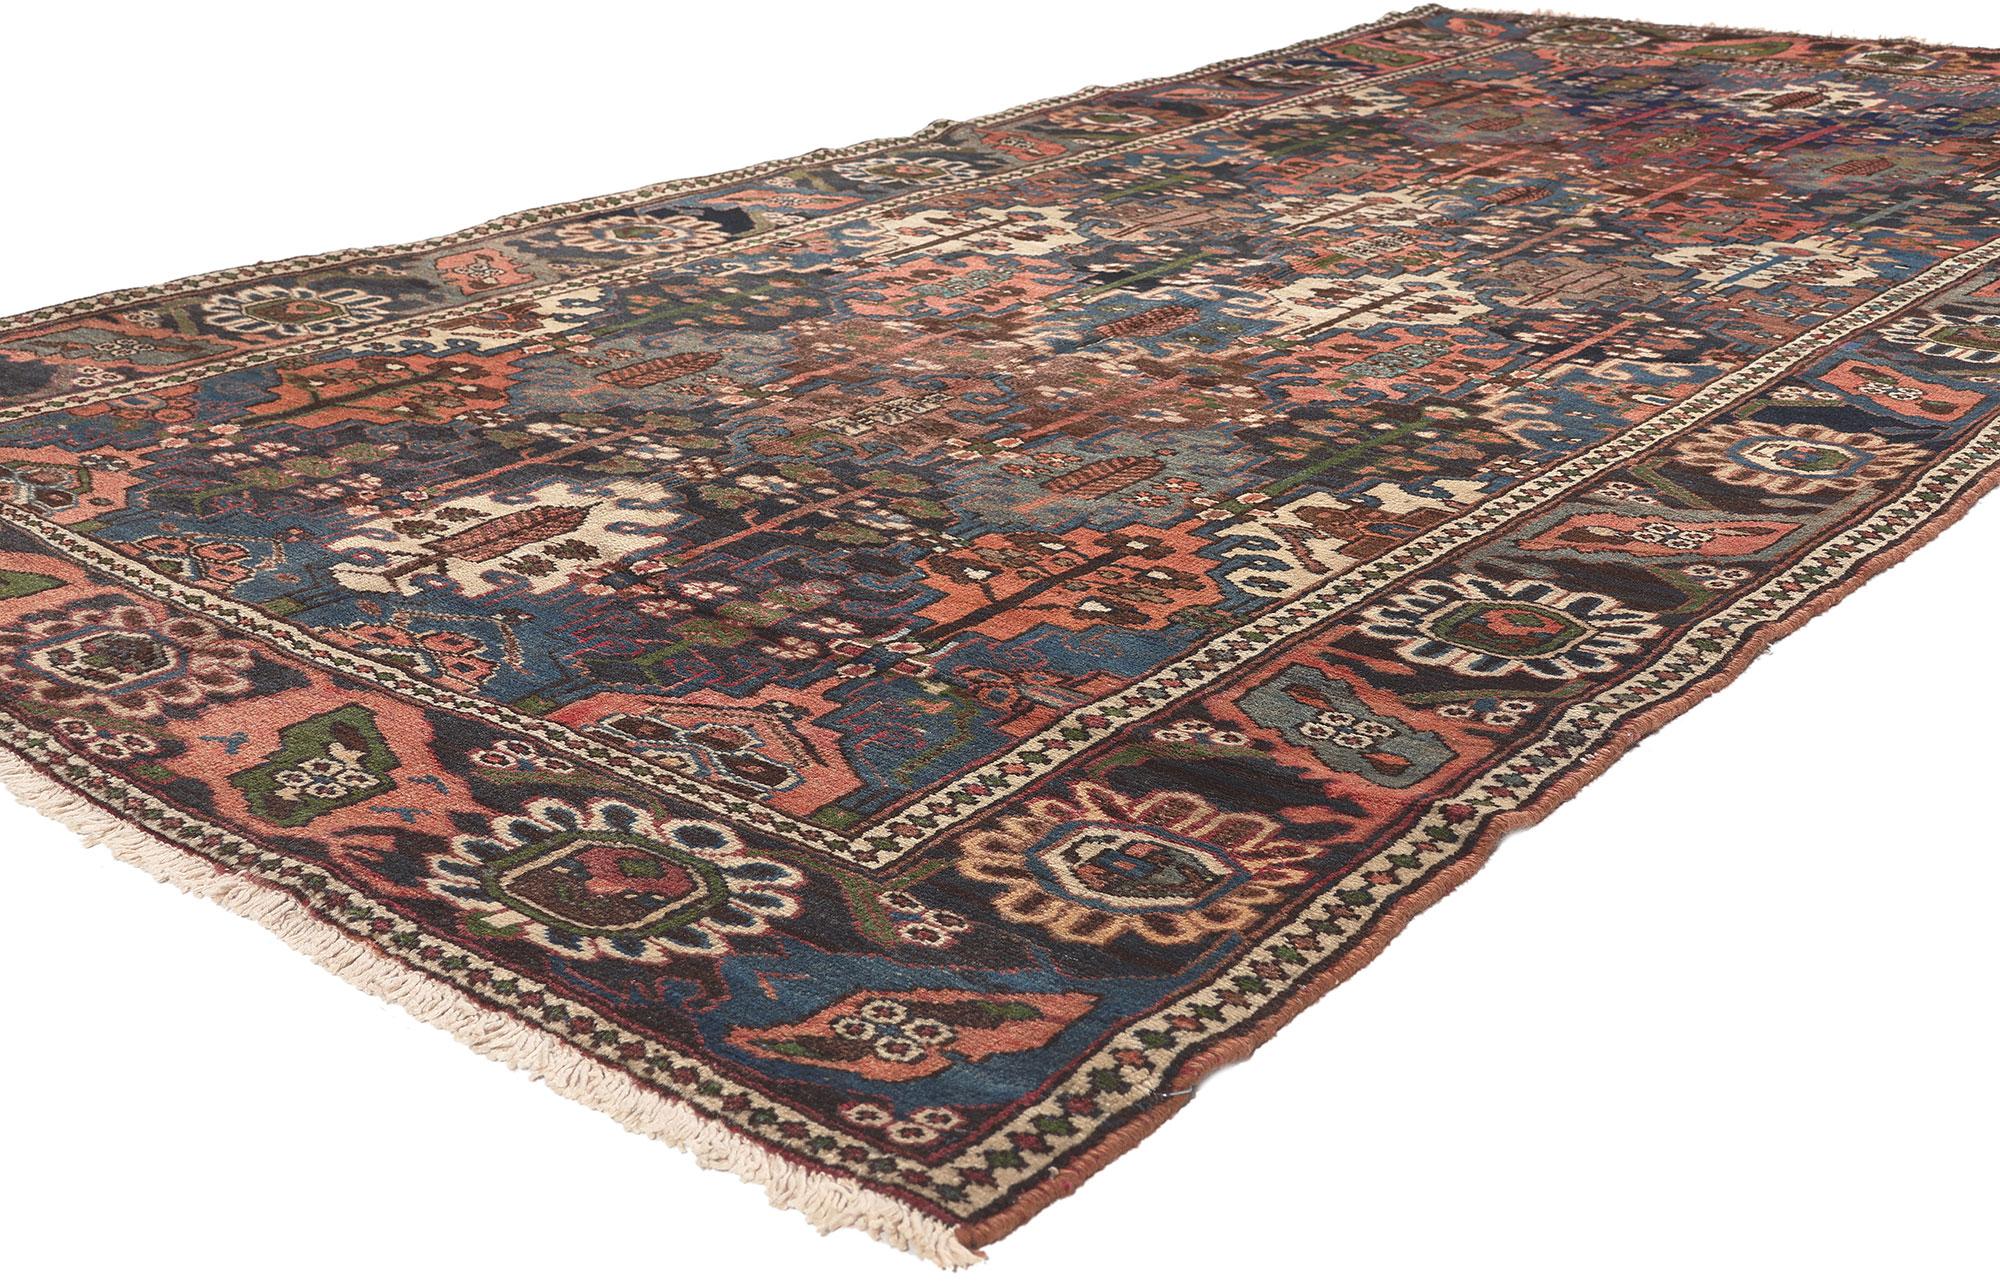 75325 Antique Persian Bakhtiari Rug, 05'00 X 09'09.
Biophilic Design meets earth-tone decadence in this antique Persian Bakhtiari rug. The four seasons garden design and warm earthy hues woven into this piece work together creating a relaxed yet